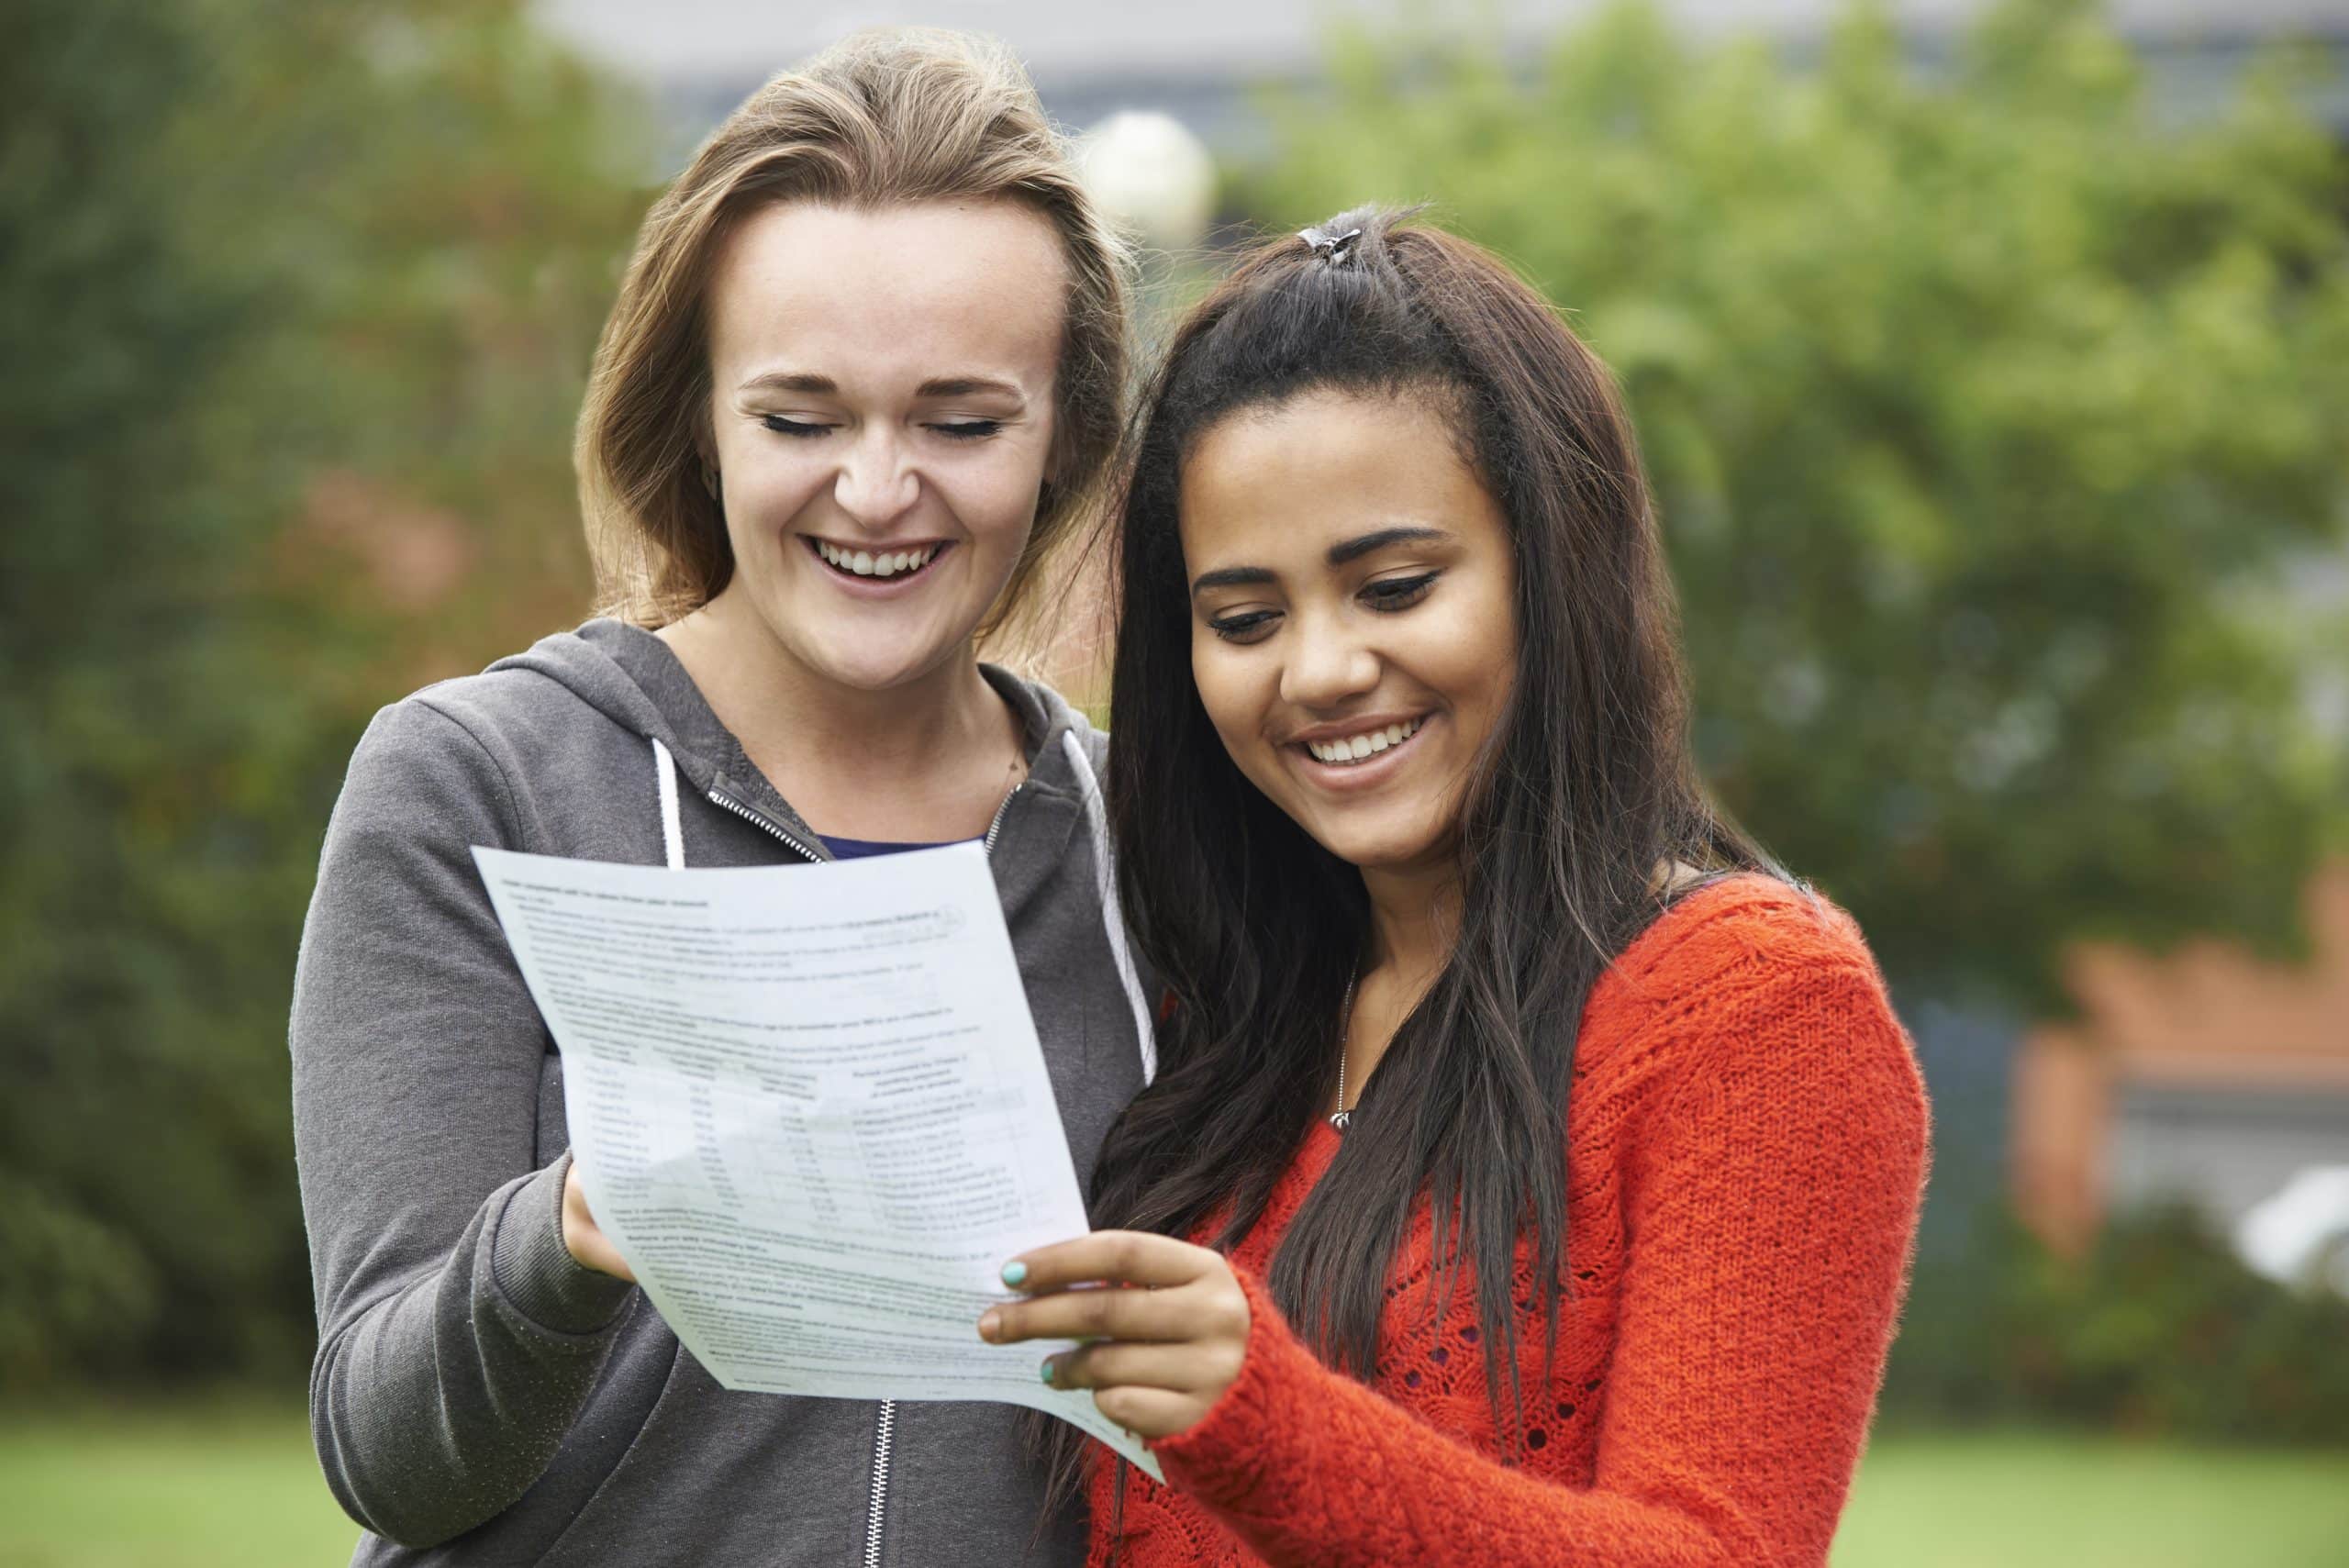 Two female students smiling at their exam results.